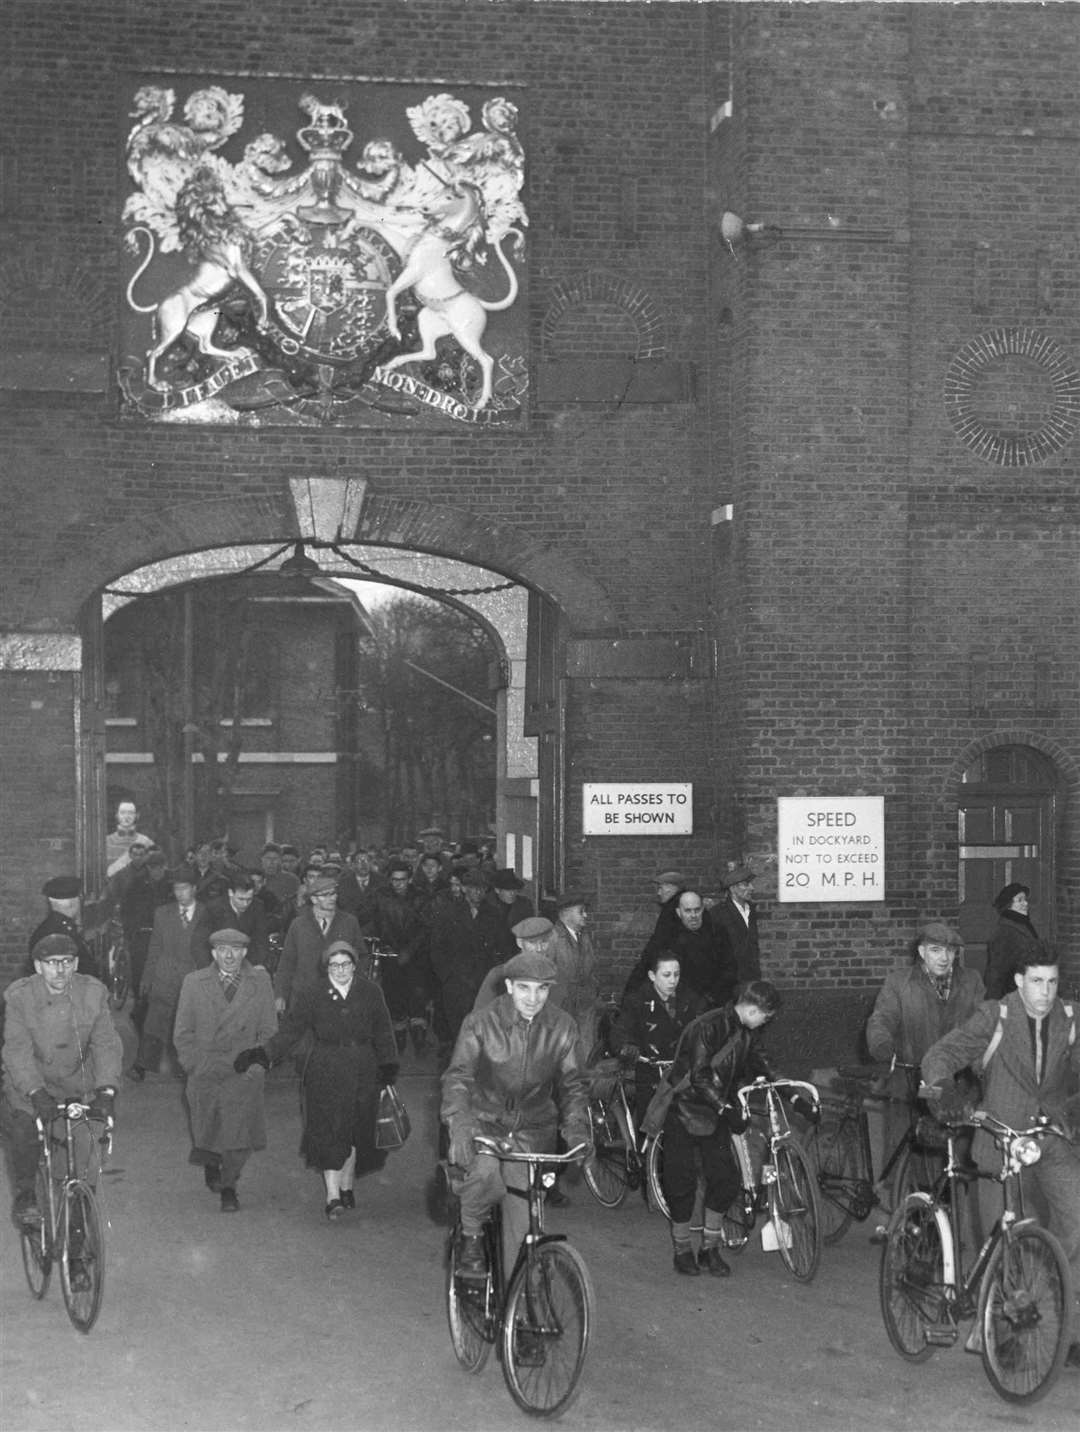 Chatham Dockyard workers cycling home after a day's work in February 1958